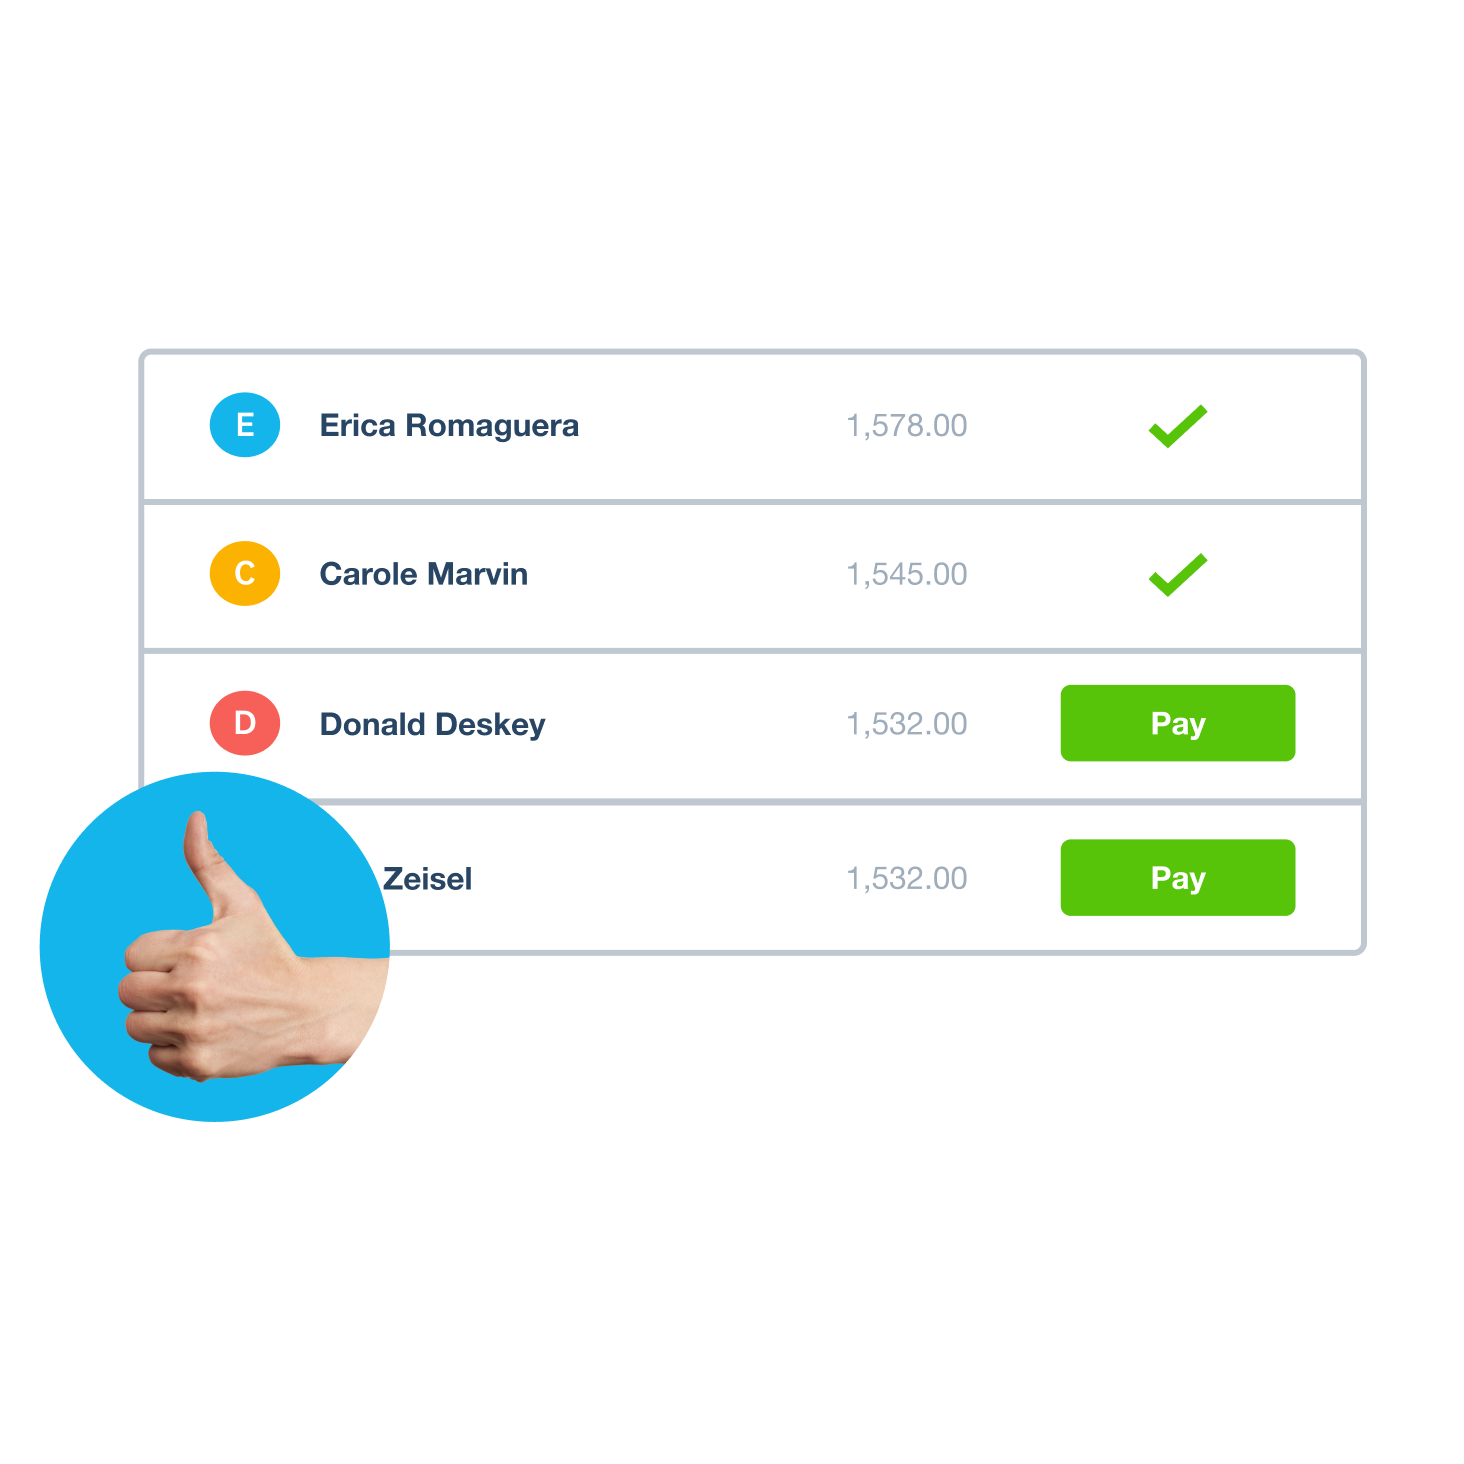 The payroll software in Xero shows which of a nonprofit’s employees to pay in this pay run.